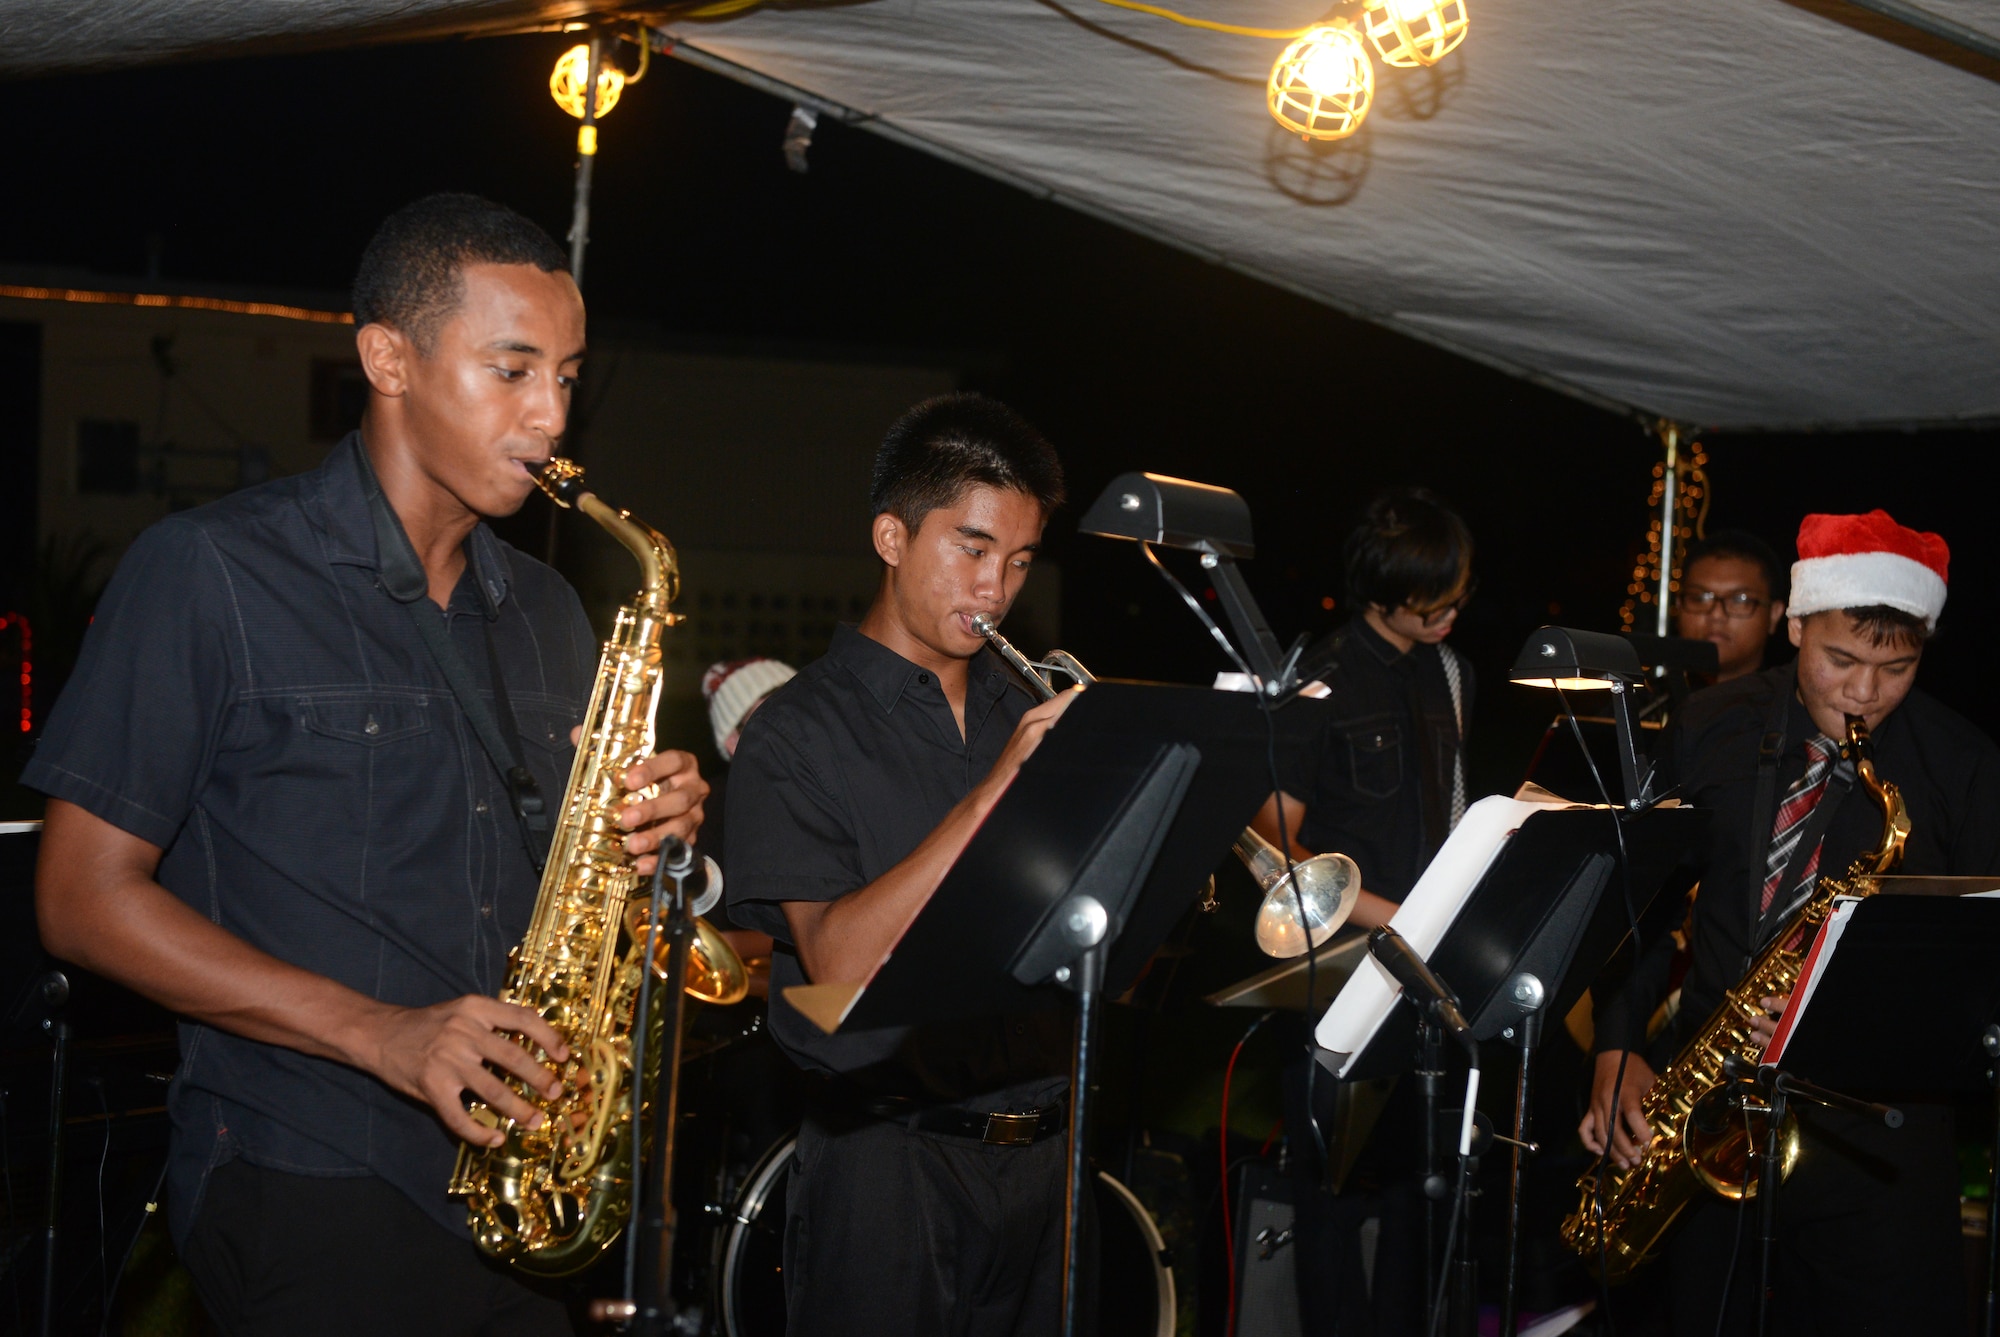 Members of the Guam High School Jazz Ensemble play holiday music for Team Andersen during the annual Rota Walk Dec 12, 2015, at Andersen Air Force Base, Guam. Hundreds of military members and civilians attended the event, which is held every December to showcase holiday decorations in the base housing area on Rota Drive. (U.S. Air Force photo/Airman 1st Class Arielle Vasquez)